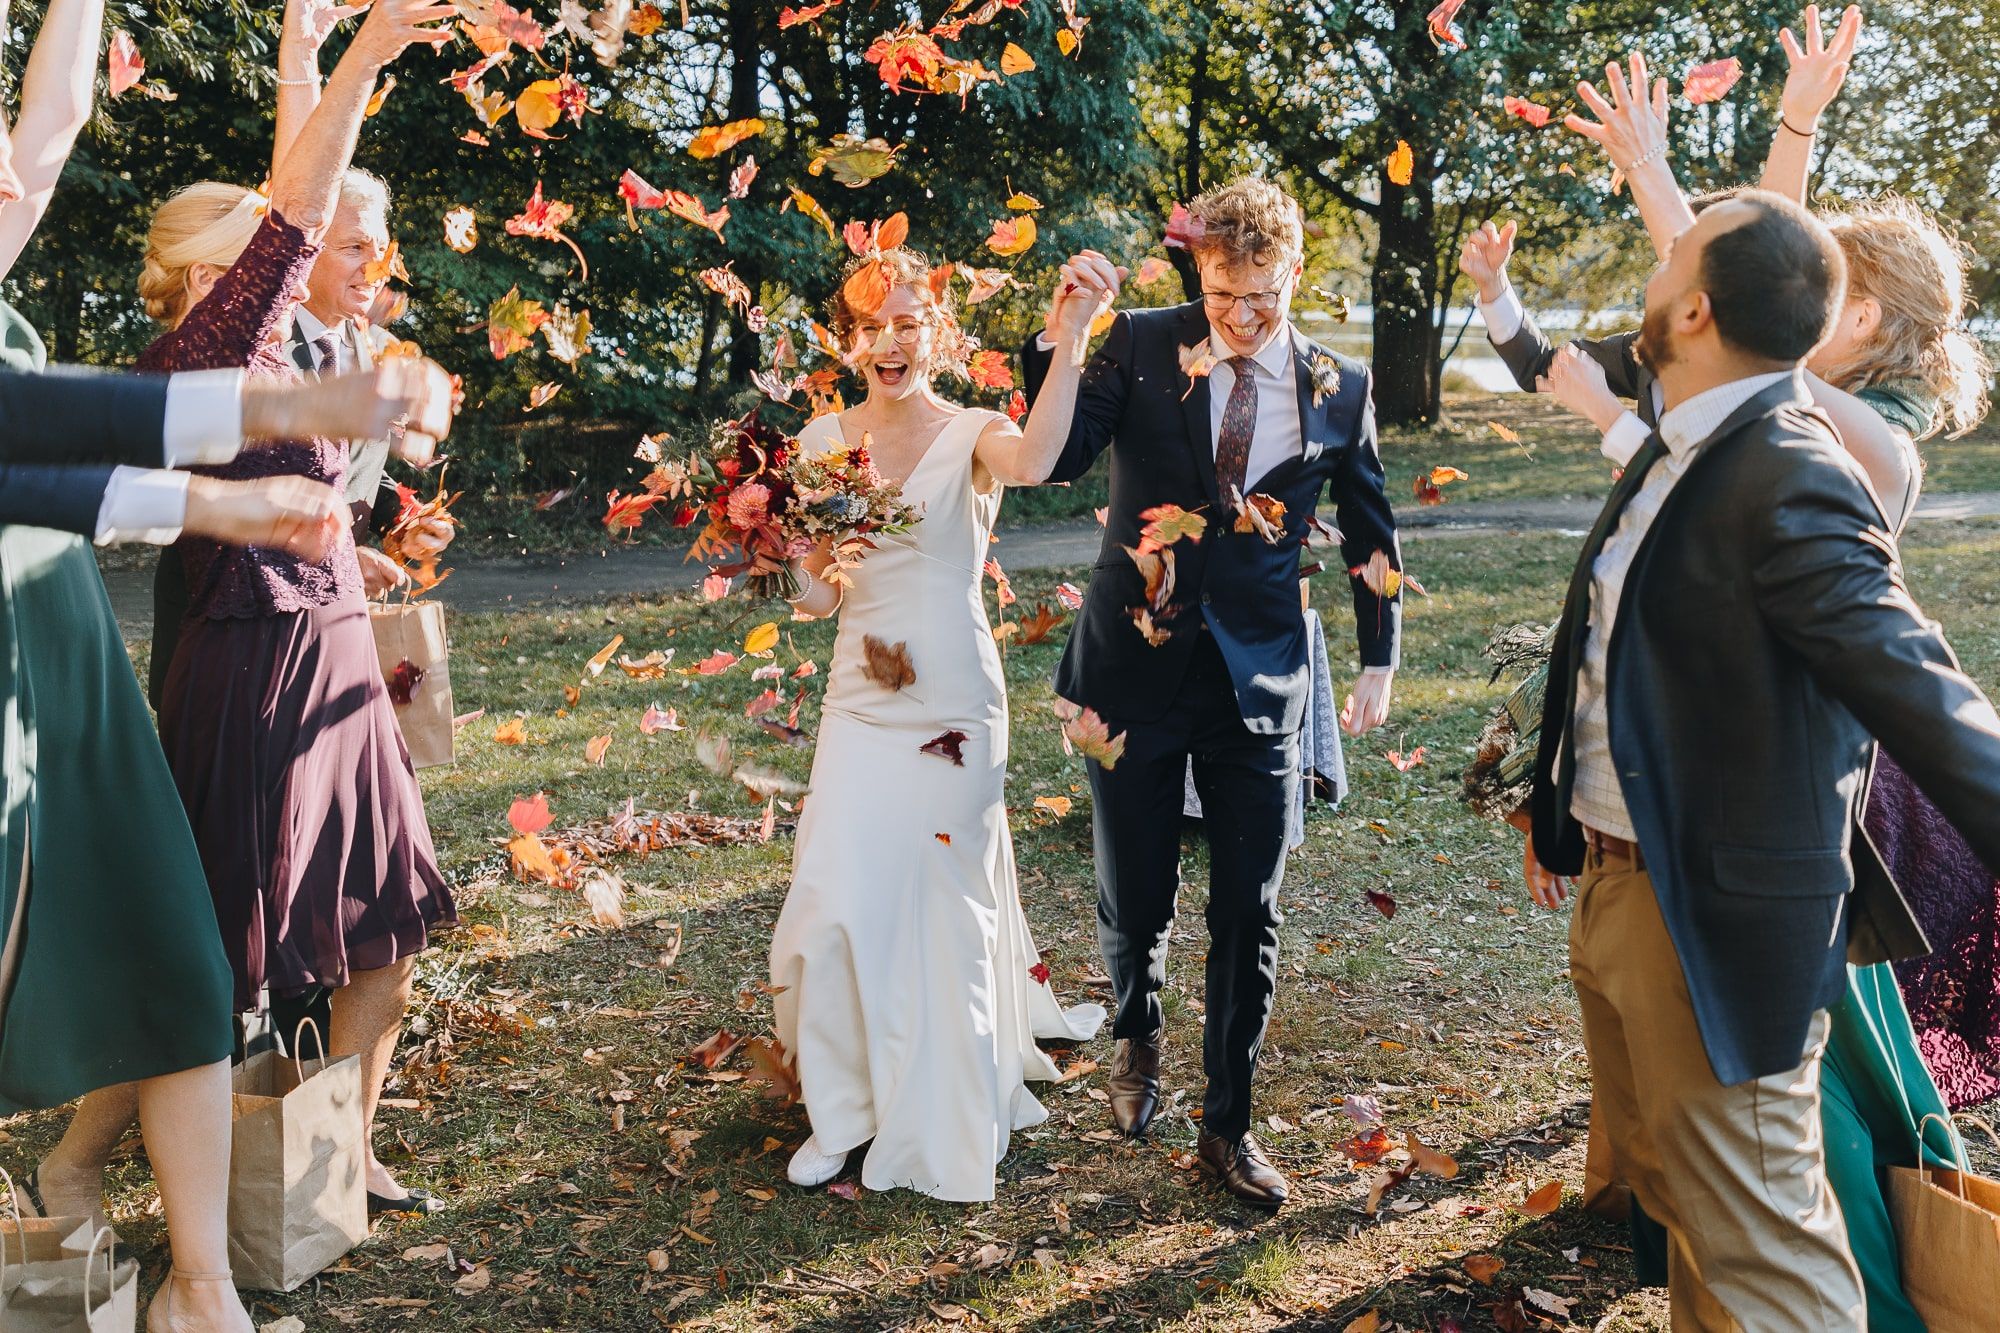 Simple, Cheap, And (sort of) Planned: Brooklyn Parks Become The Most Popular Wedding Venue